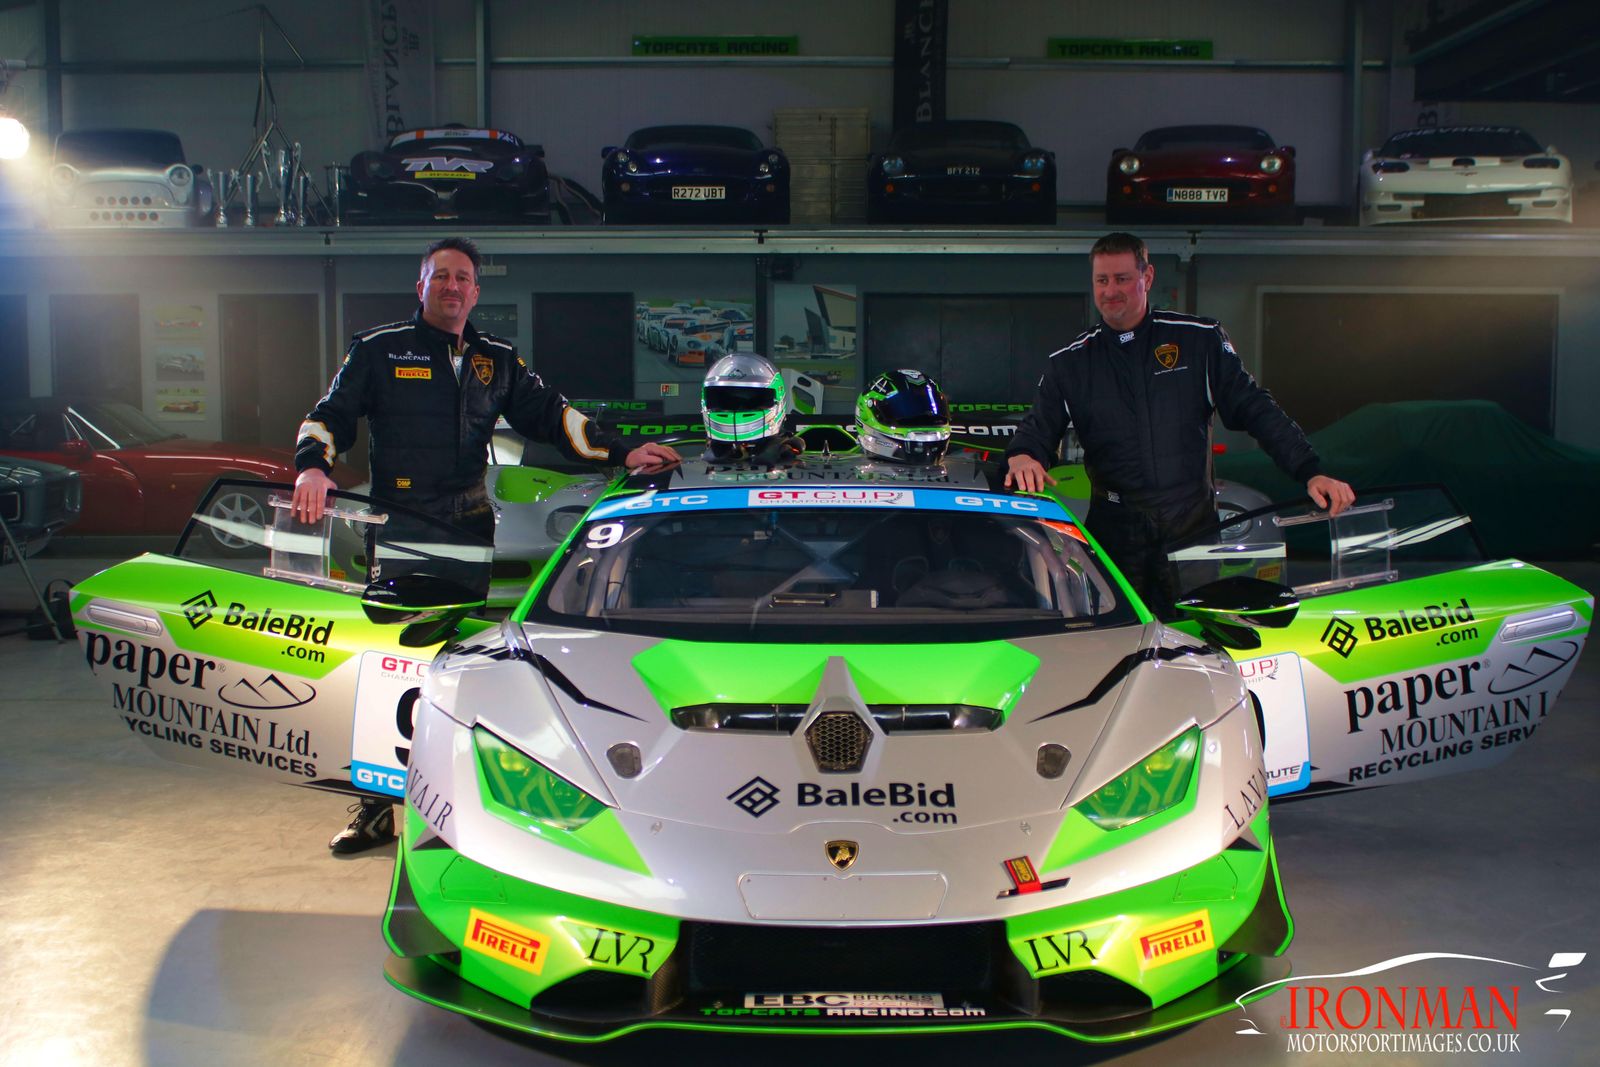 Topcats Racing unveil the livery for their Lamborghini Super Trofeo.